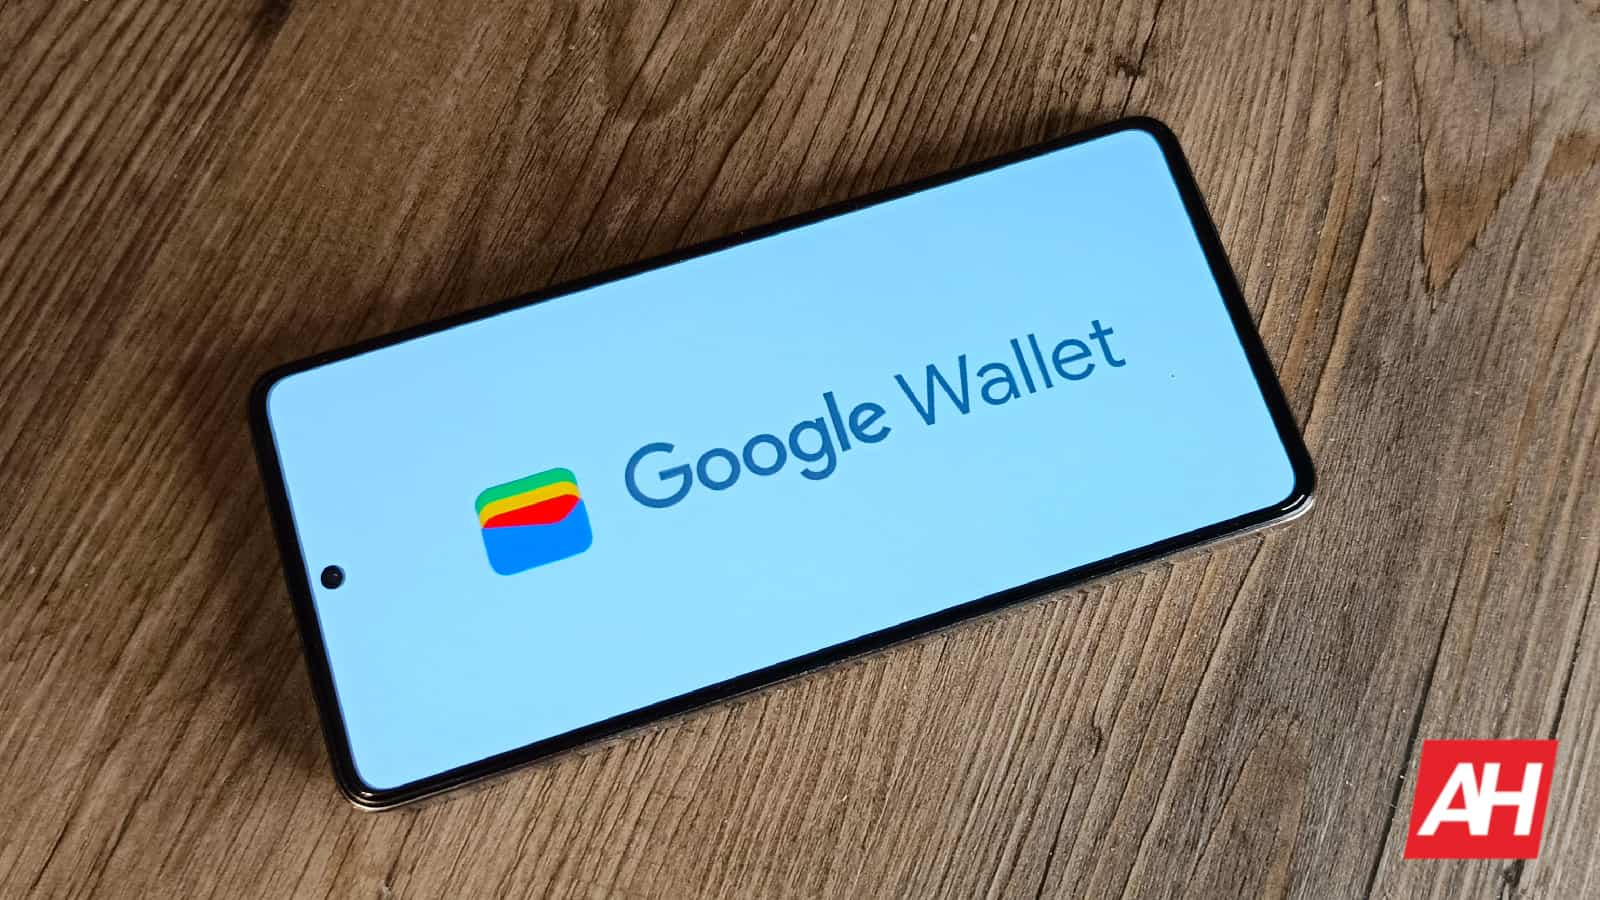 Featured image for Google Wallet extends support for 44 more banks including Venmo